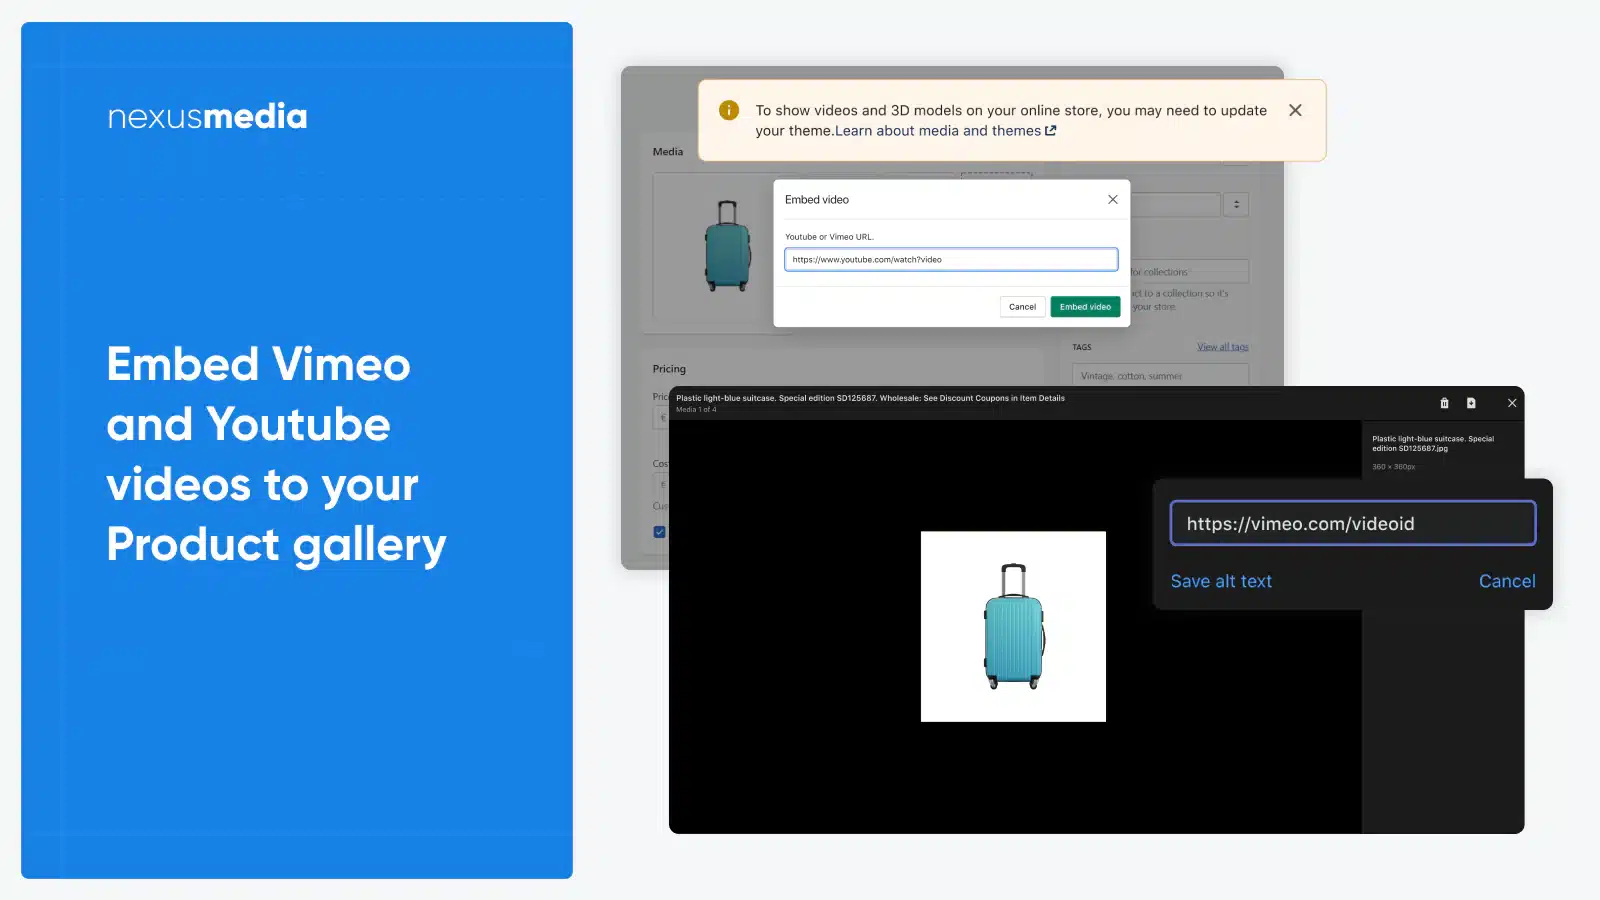 easyvideo-product-videos-embed-vimeo